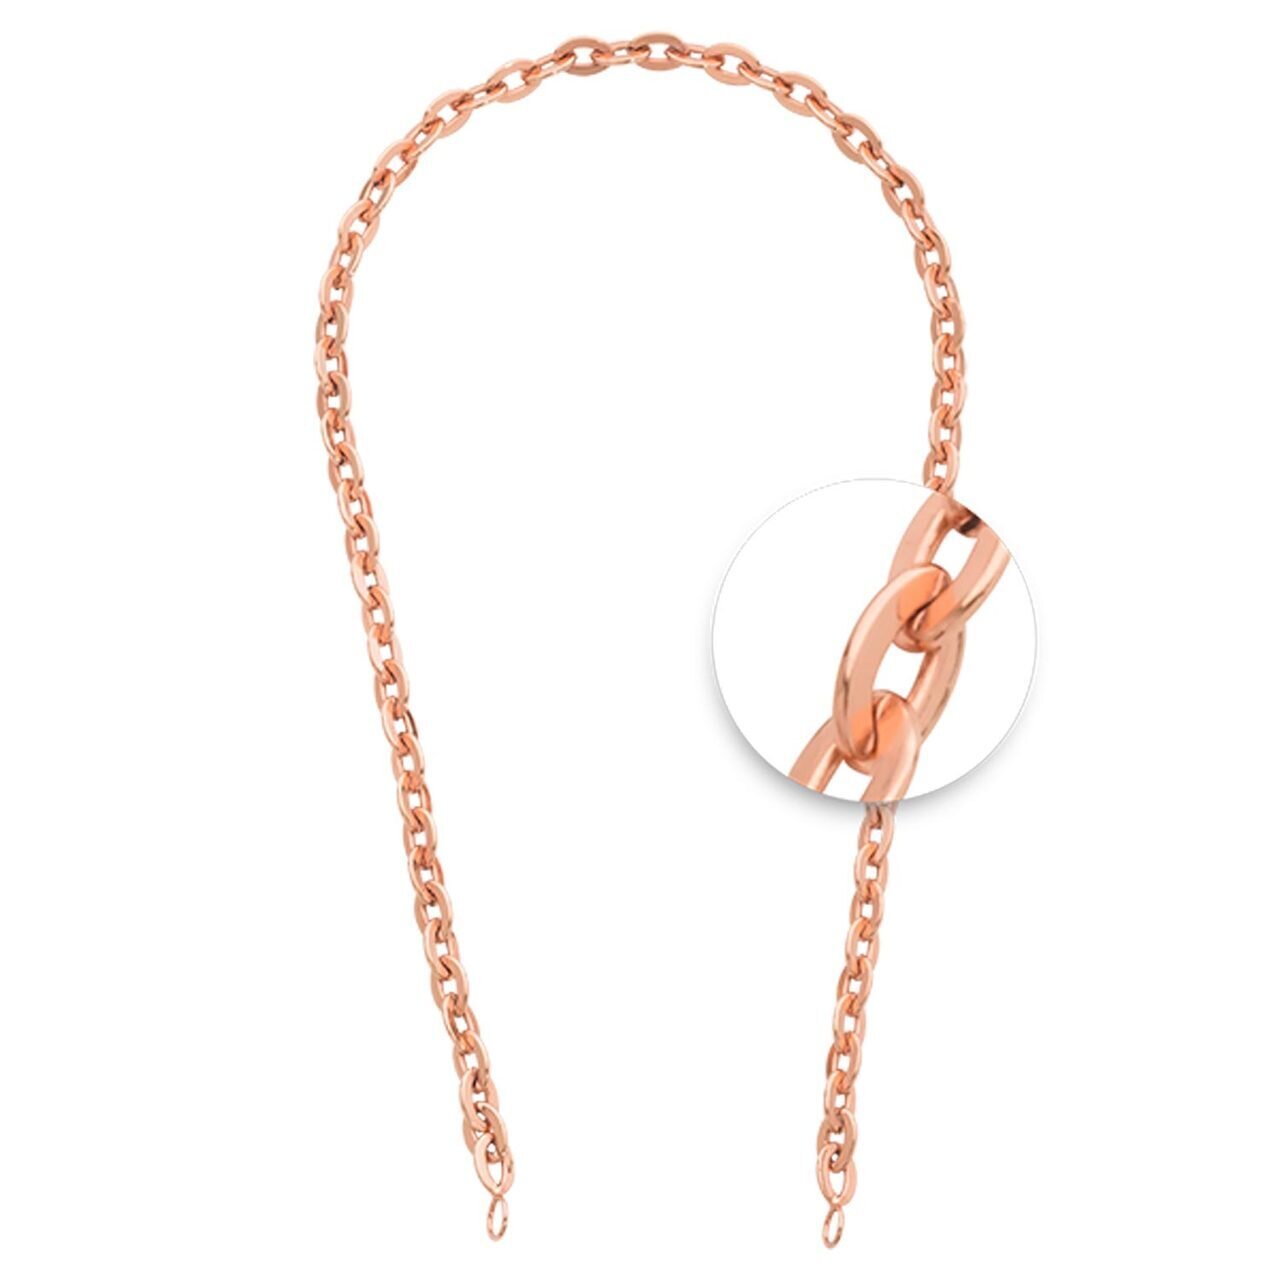 Nikki Lissoni 0 Anchor Rolled Flat Cable Chain 6 x 8mm For Tags Rose Gold-plated 40cm N1026RG4